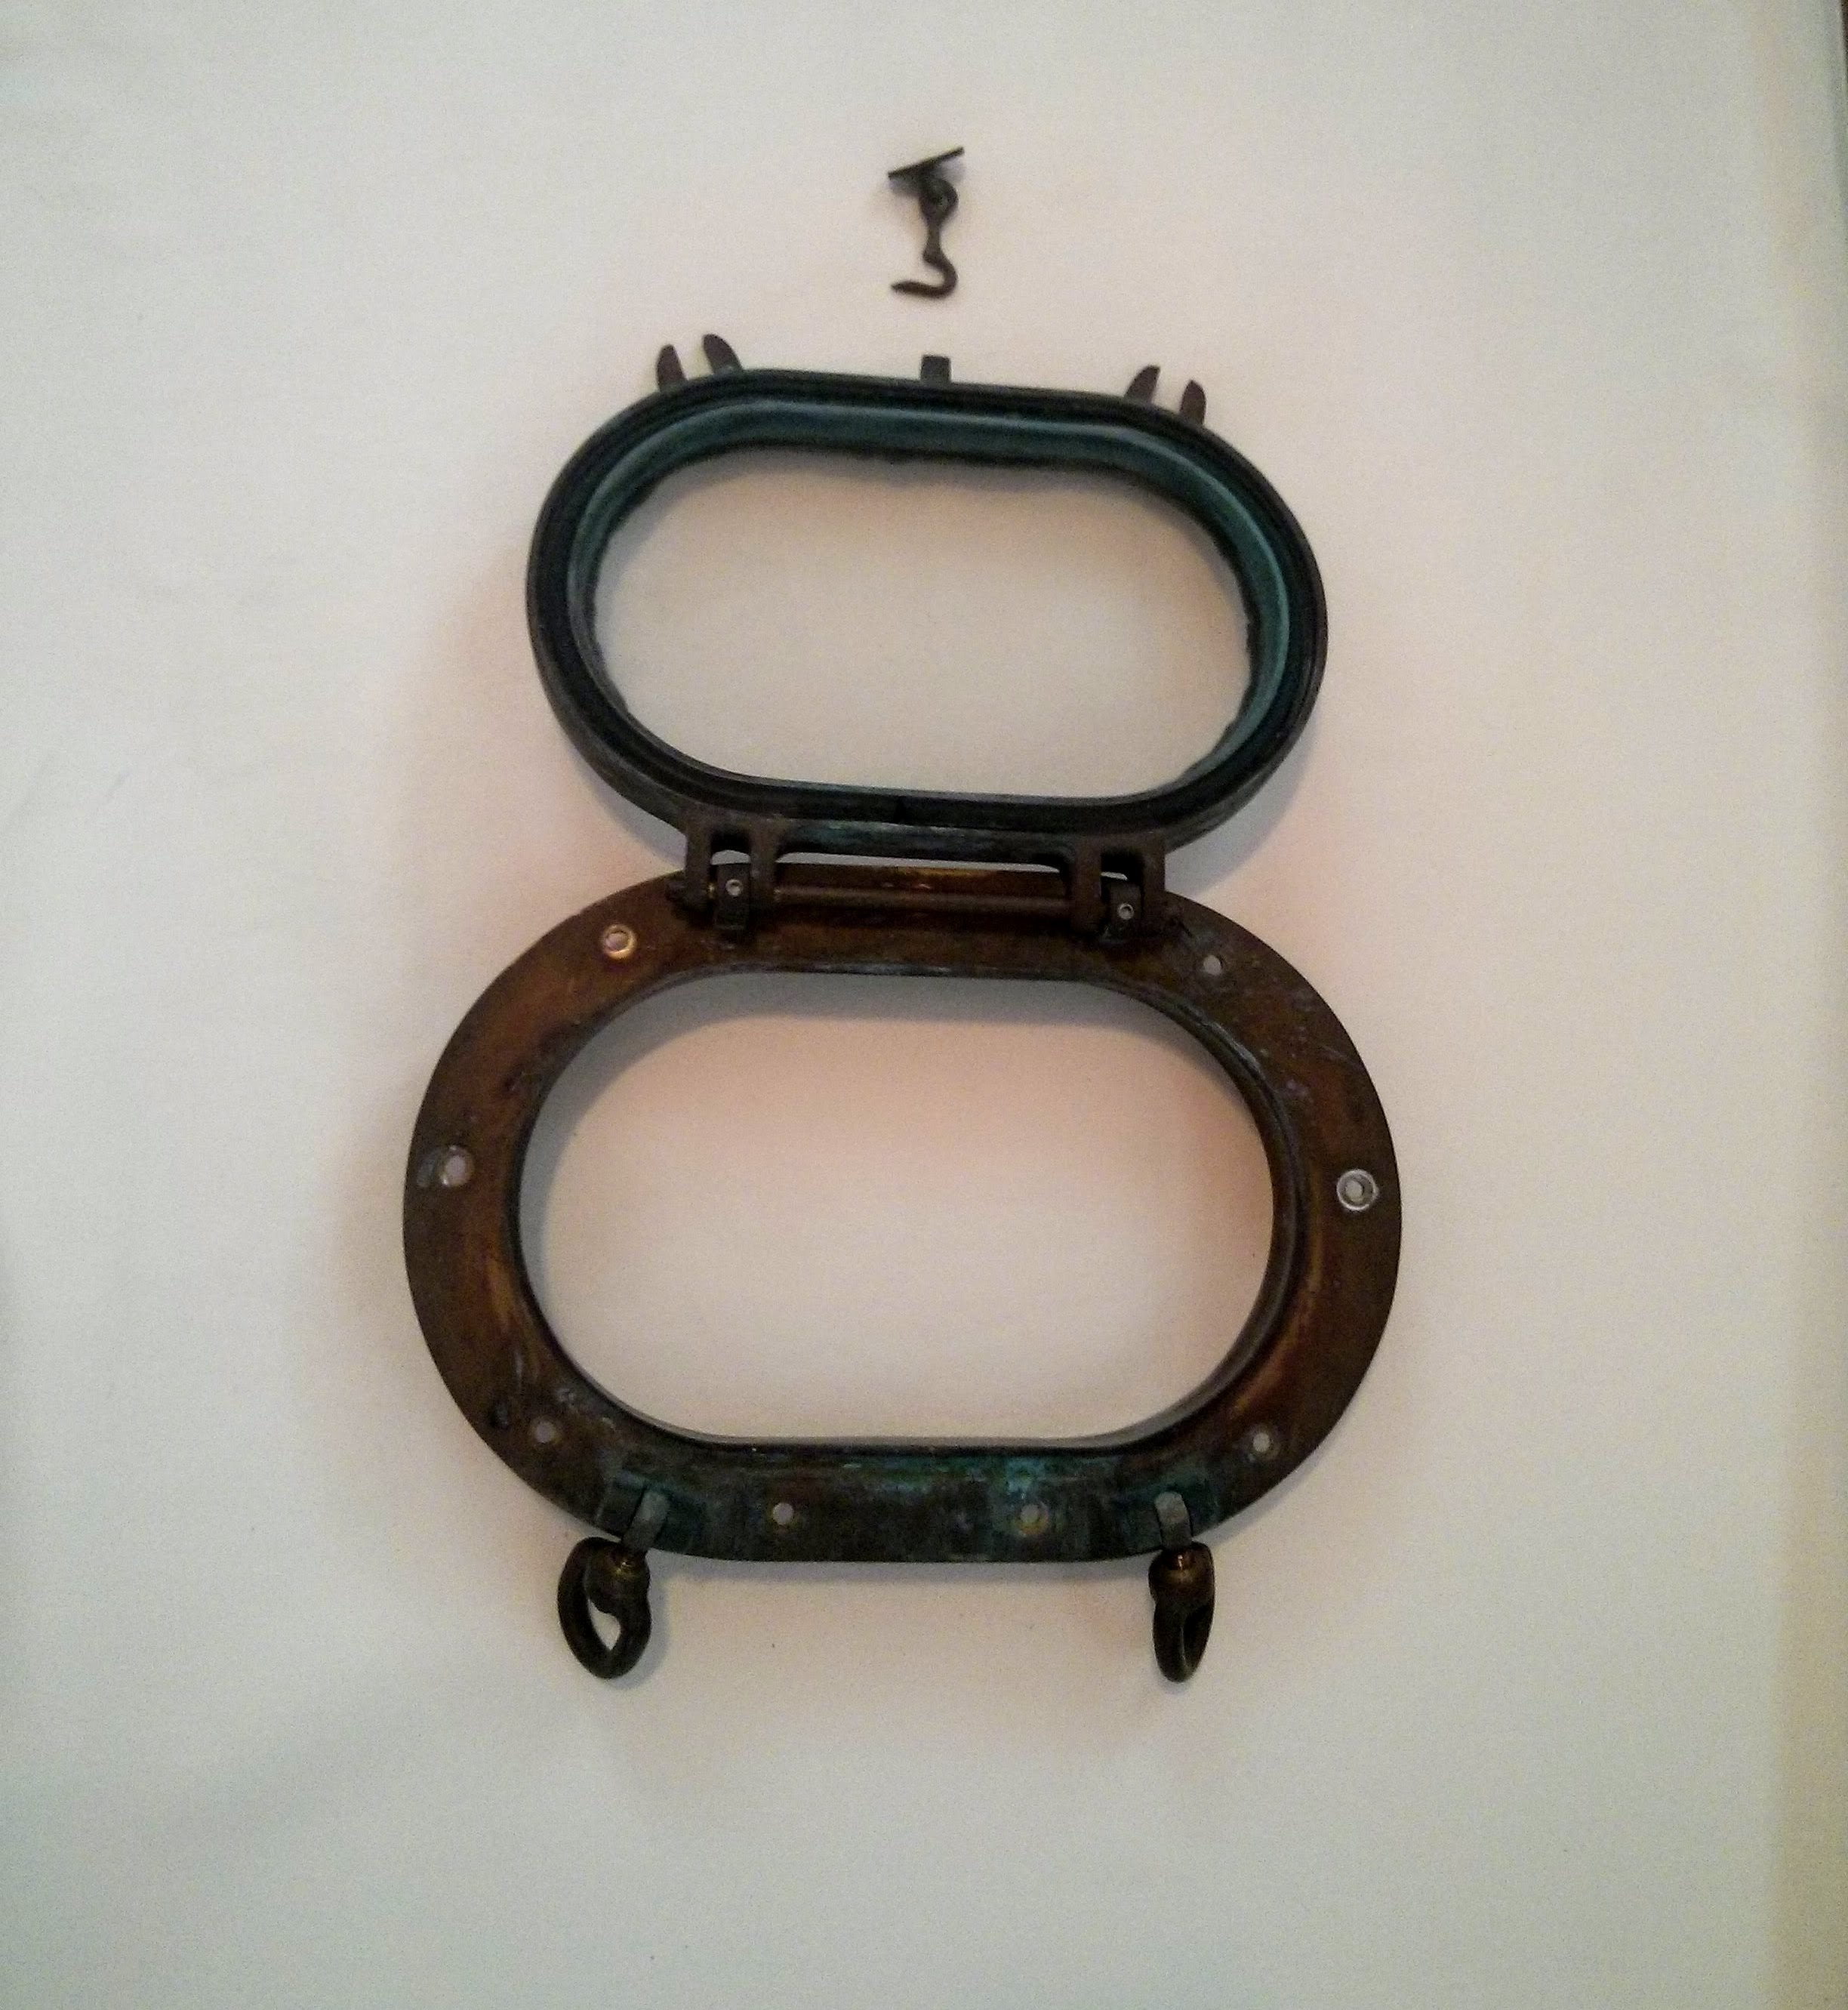 SOLD - Port Open with retaining  hook at top